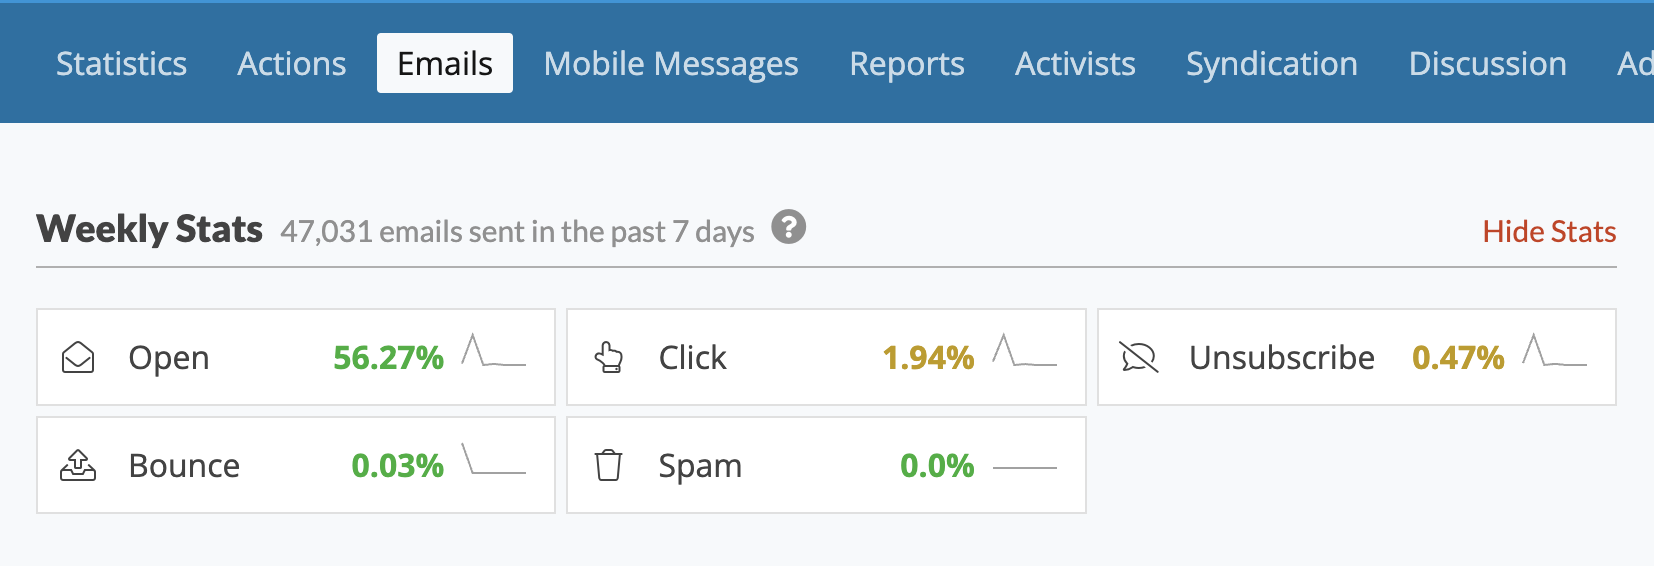 A screenshot of the Emails page on Action Network showing the new Weekly Stats breakdown in the Deliverability Dashboard.